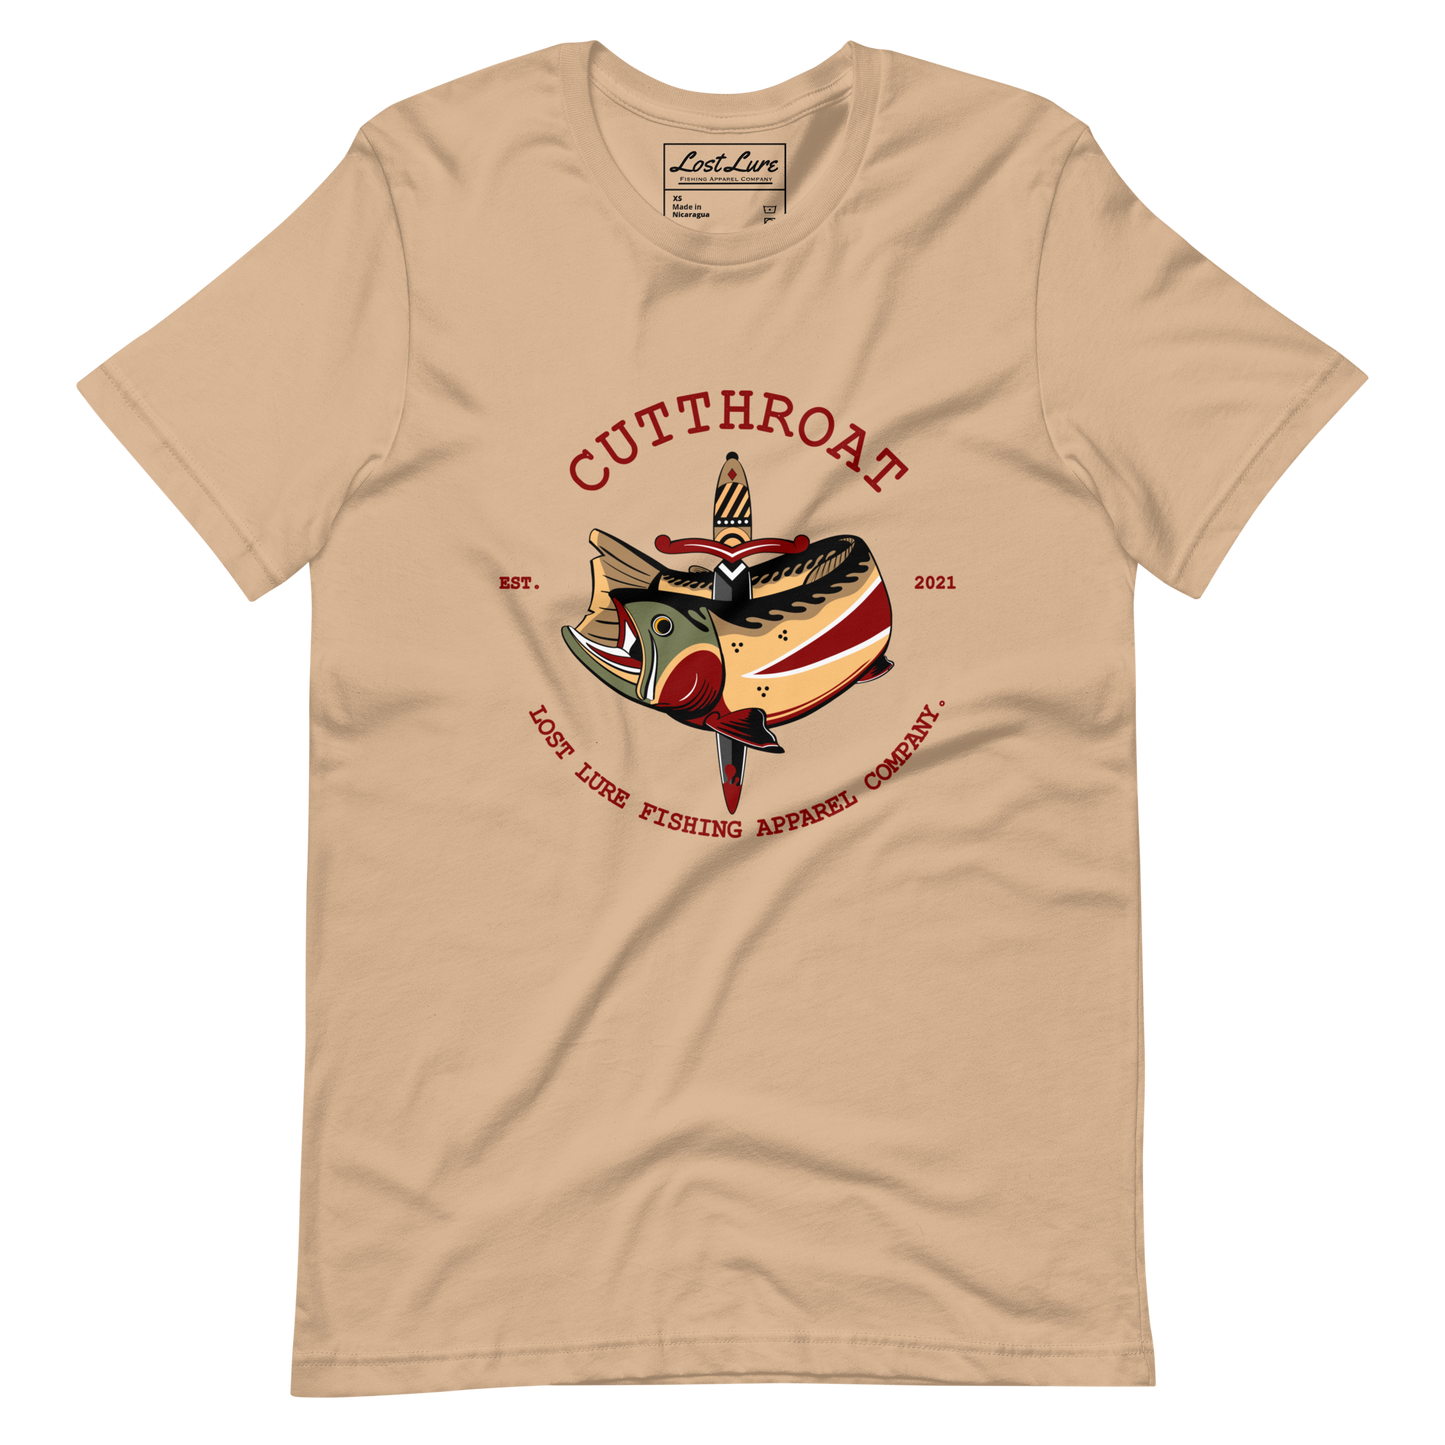 Cutthroat Trout fishing shirt. It’s an American traditional style design with a cutthroat trout and a dagger. The shirt reads Cutthroat trout, est. 2021, lost lure fishing apparel company. The fishing design is on the front of the shirt. Brown fishing shirt, front side